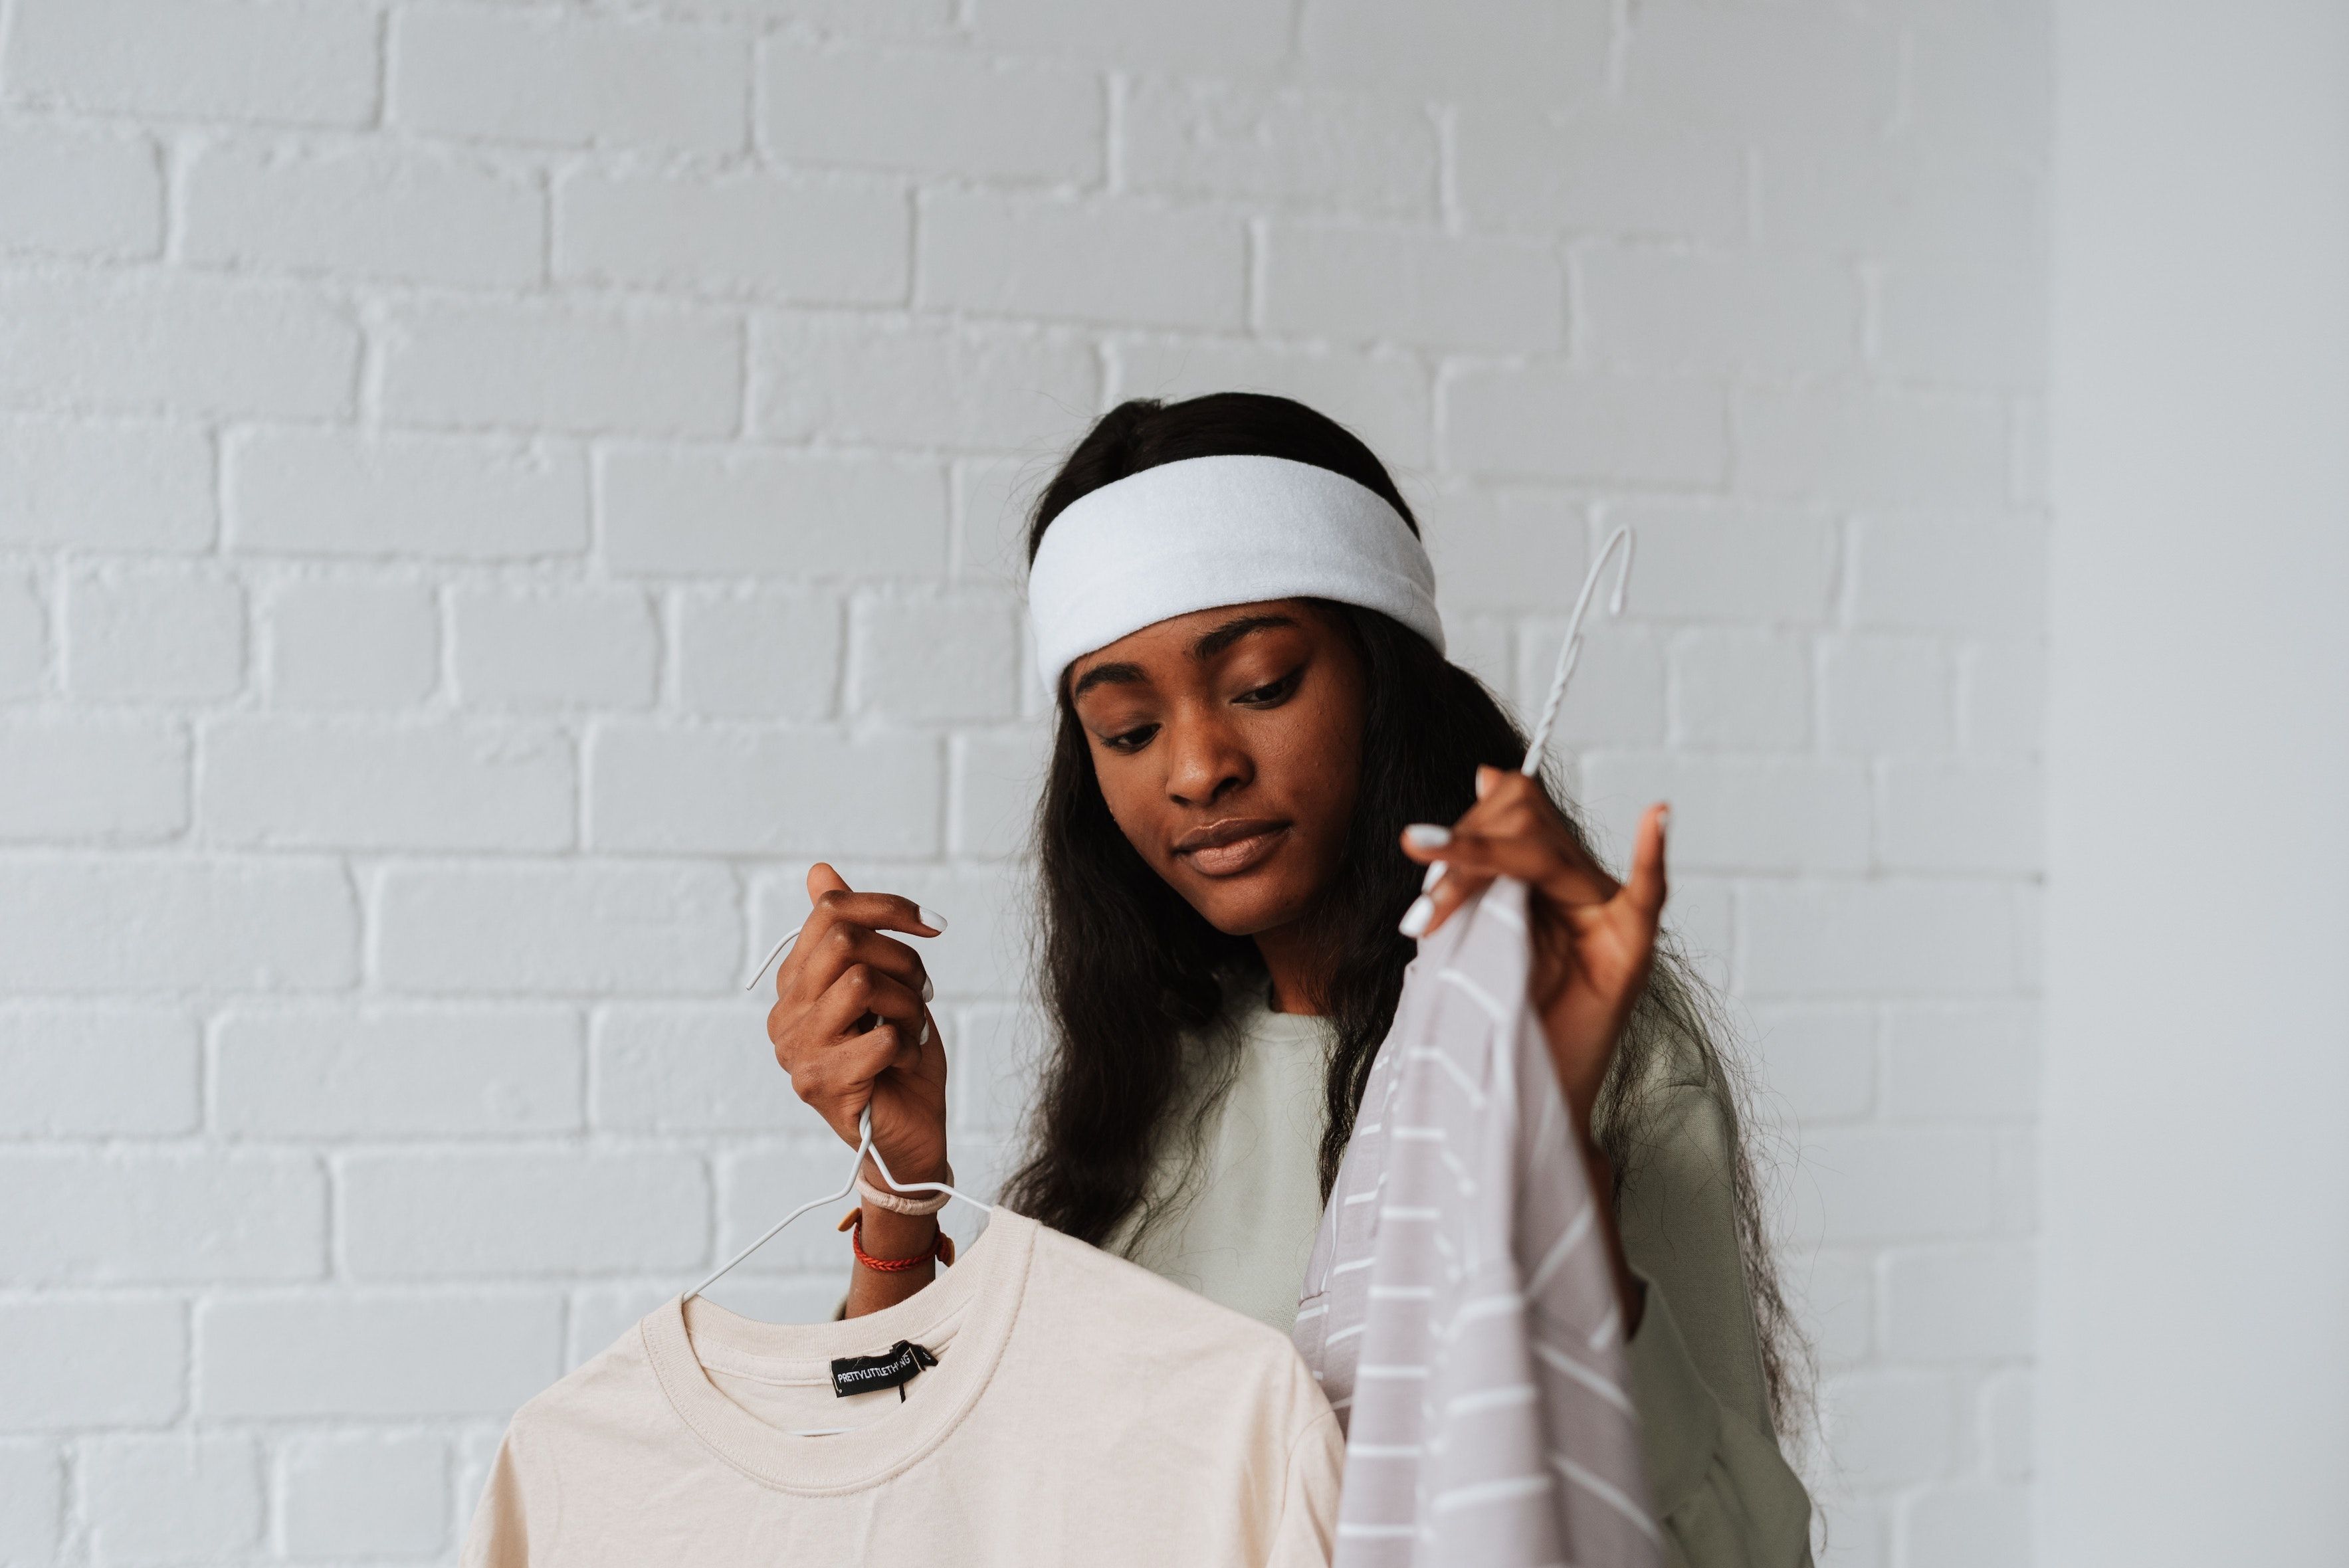 In a white-brick room, a girl in white headband holds up two pieces neutral-colored of clothing